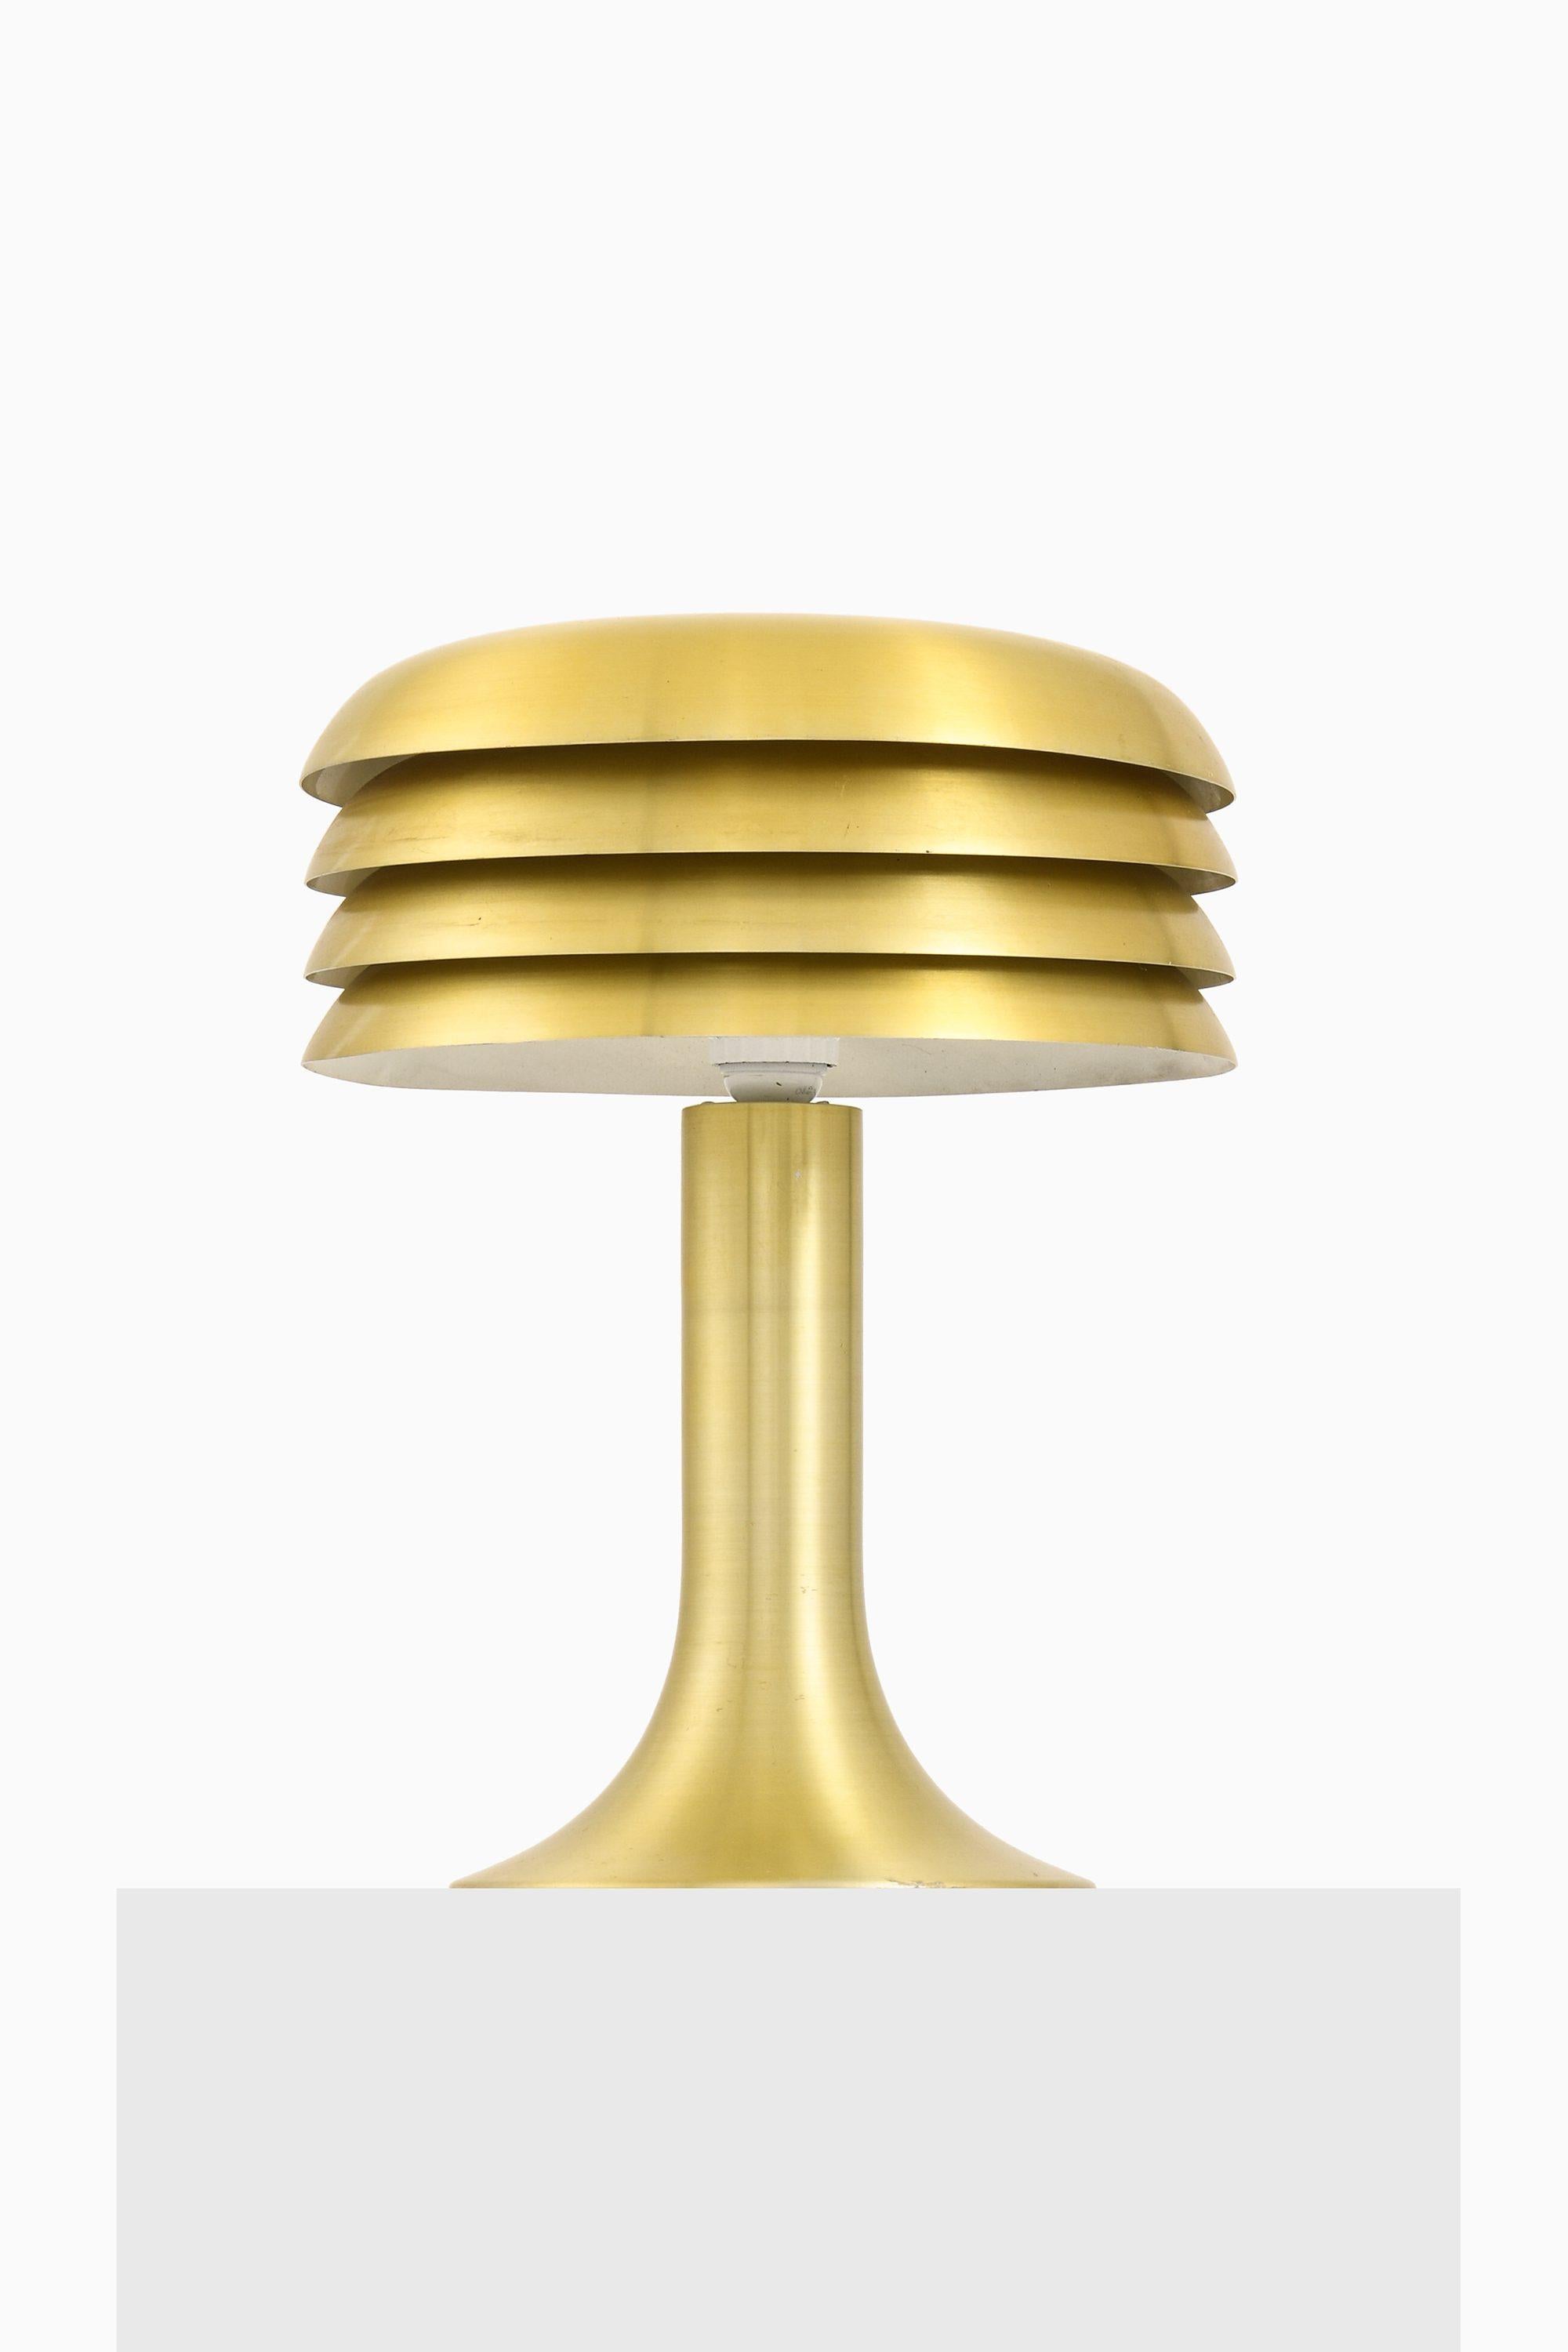 Pair of Table Lamps in Brass by Hans-Agne Jakobsson, 1950's

Additional Information:
Material: Brass
Style: Mid century, Scandinavian
Pair of table lamps model BN-26
Produced by Hans-Agne Jakobsson AB in Markaryd, Sweden
Dimensions (W x D x H): 33 x